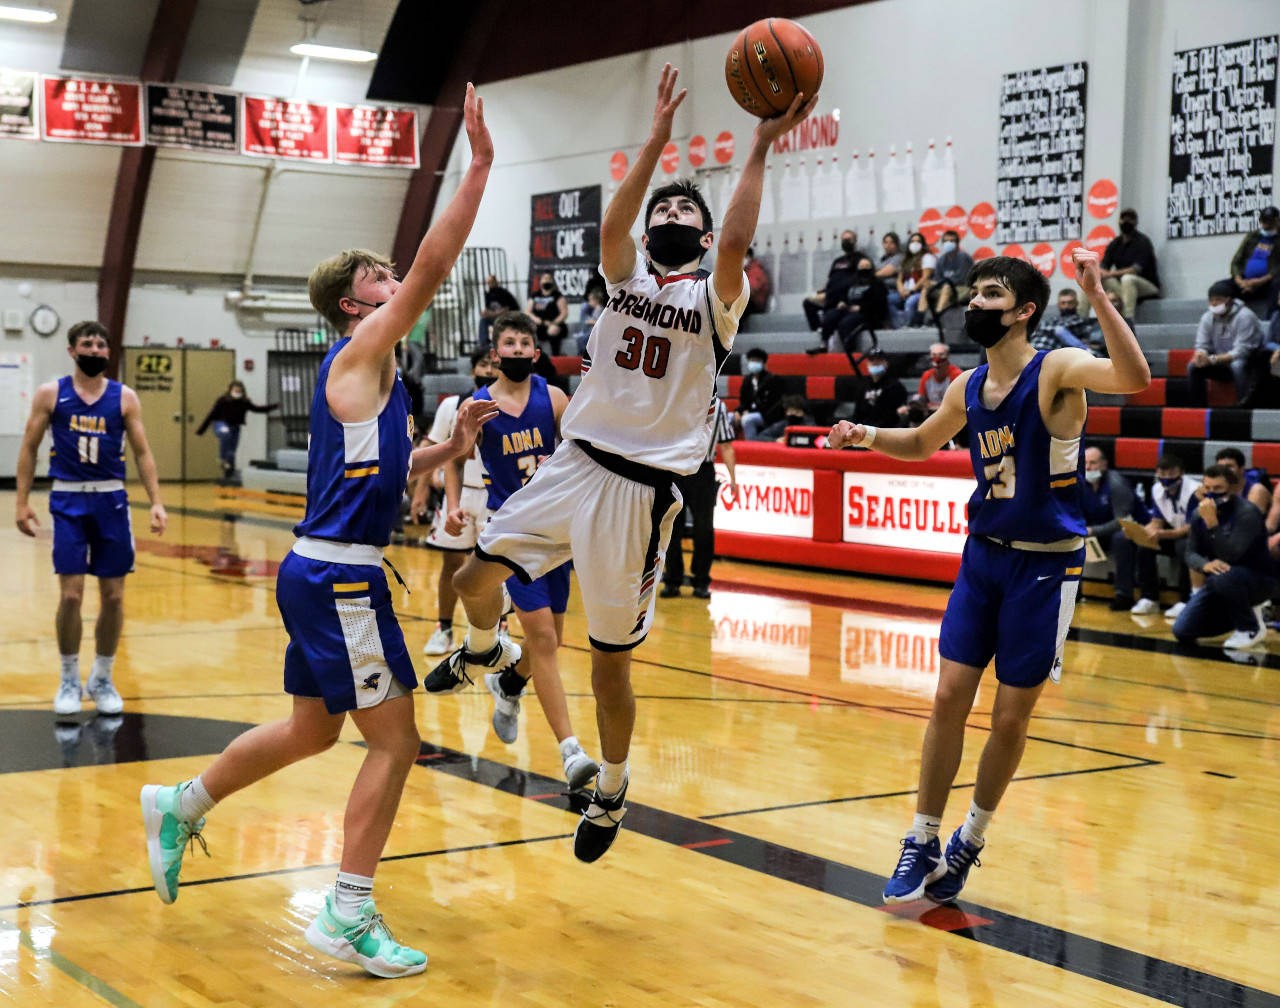 PHOTO BY LARRY BALE
Raymond's Morgan Anderson (30) was named to the First Team of the 2B Pacific All-League Boys Basketball Team on Friday after averaging over 19 points per game this season.